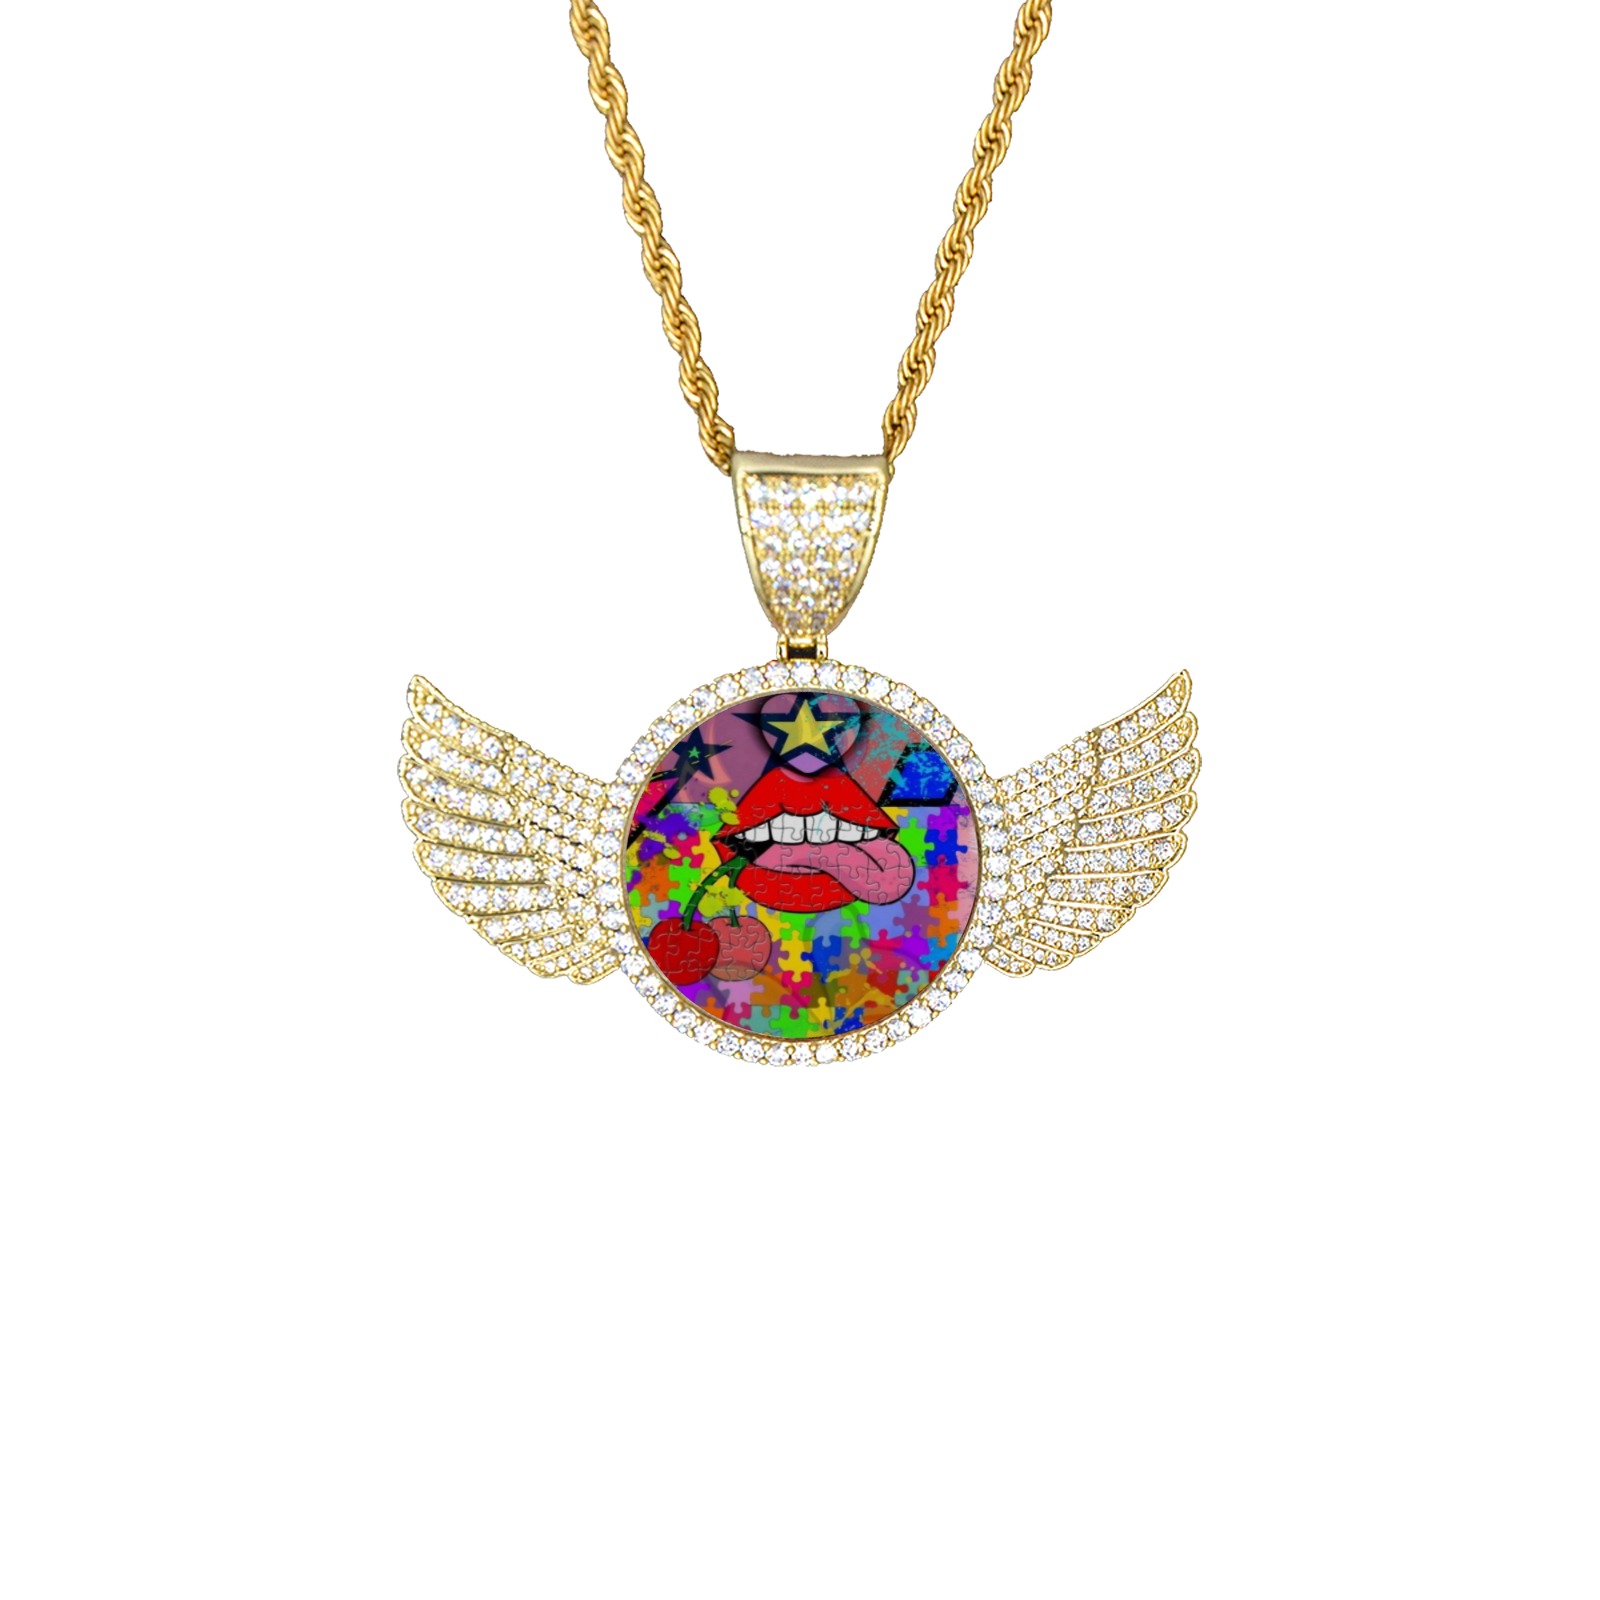 Lick me by Nico Bielow Wings Gold Photo Pendant with Rope Chain